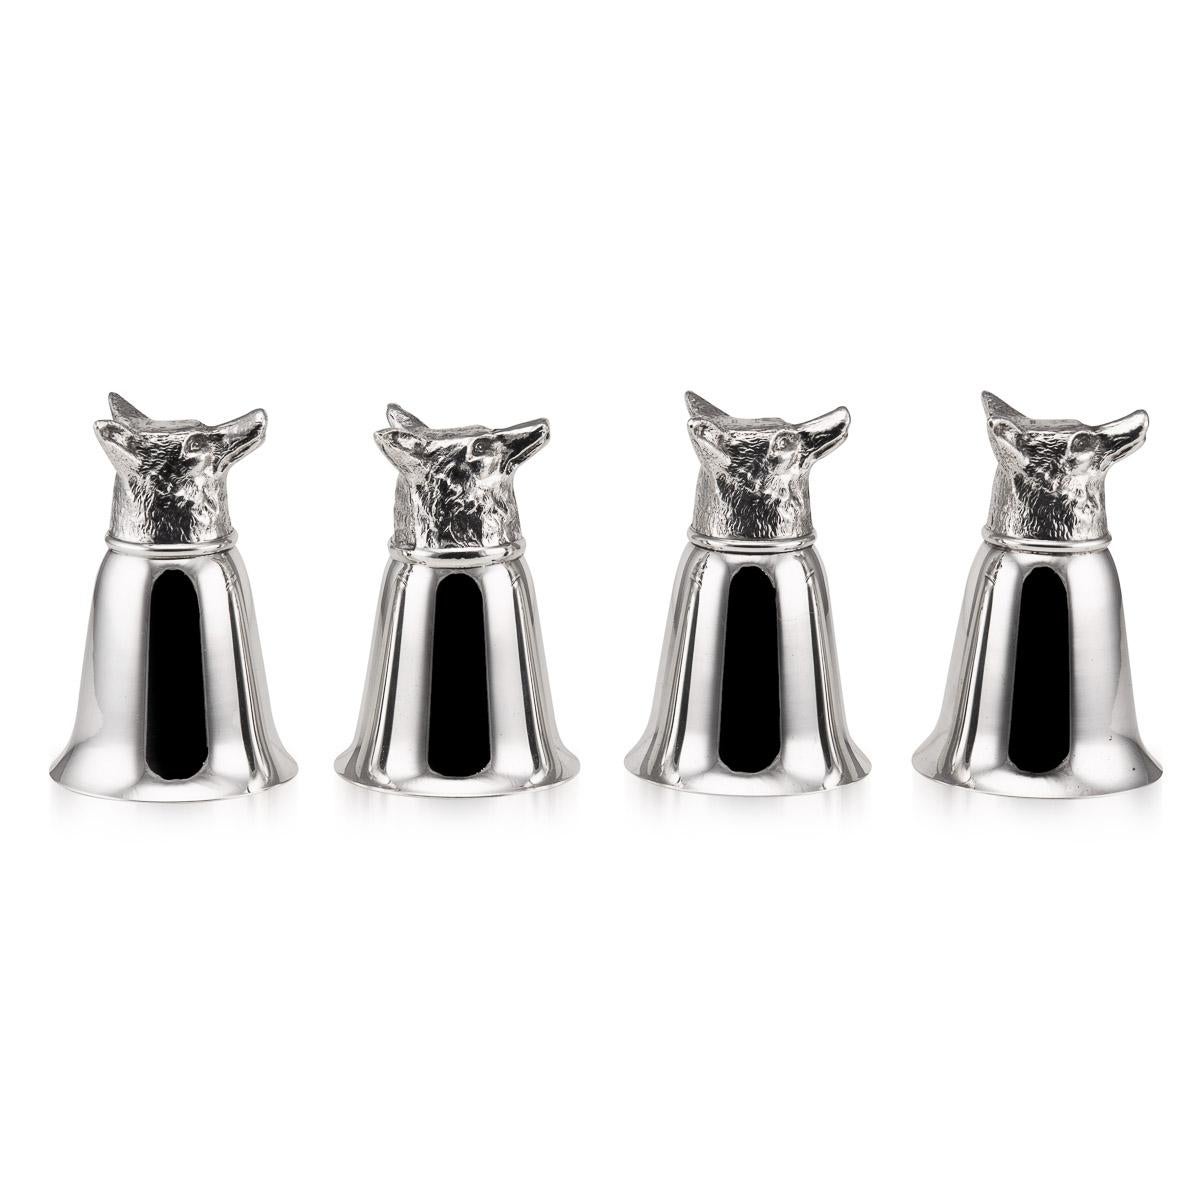 20th Century Italian Silver Plated Fox Stirrup Cups, C.1970 For Sale 1